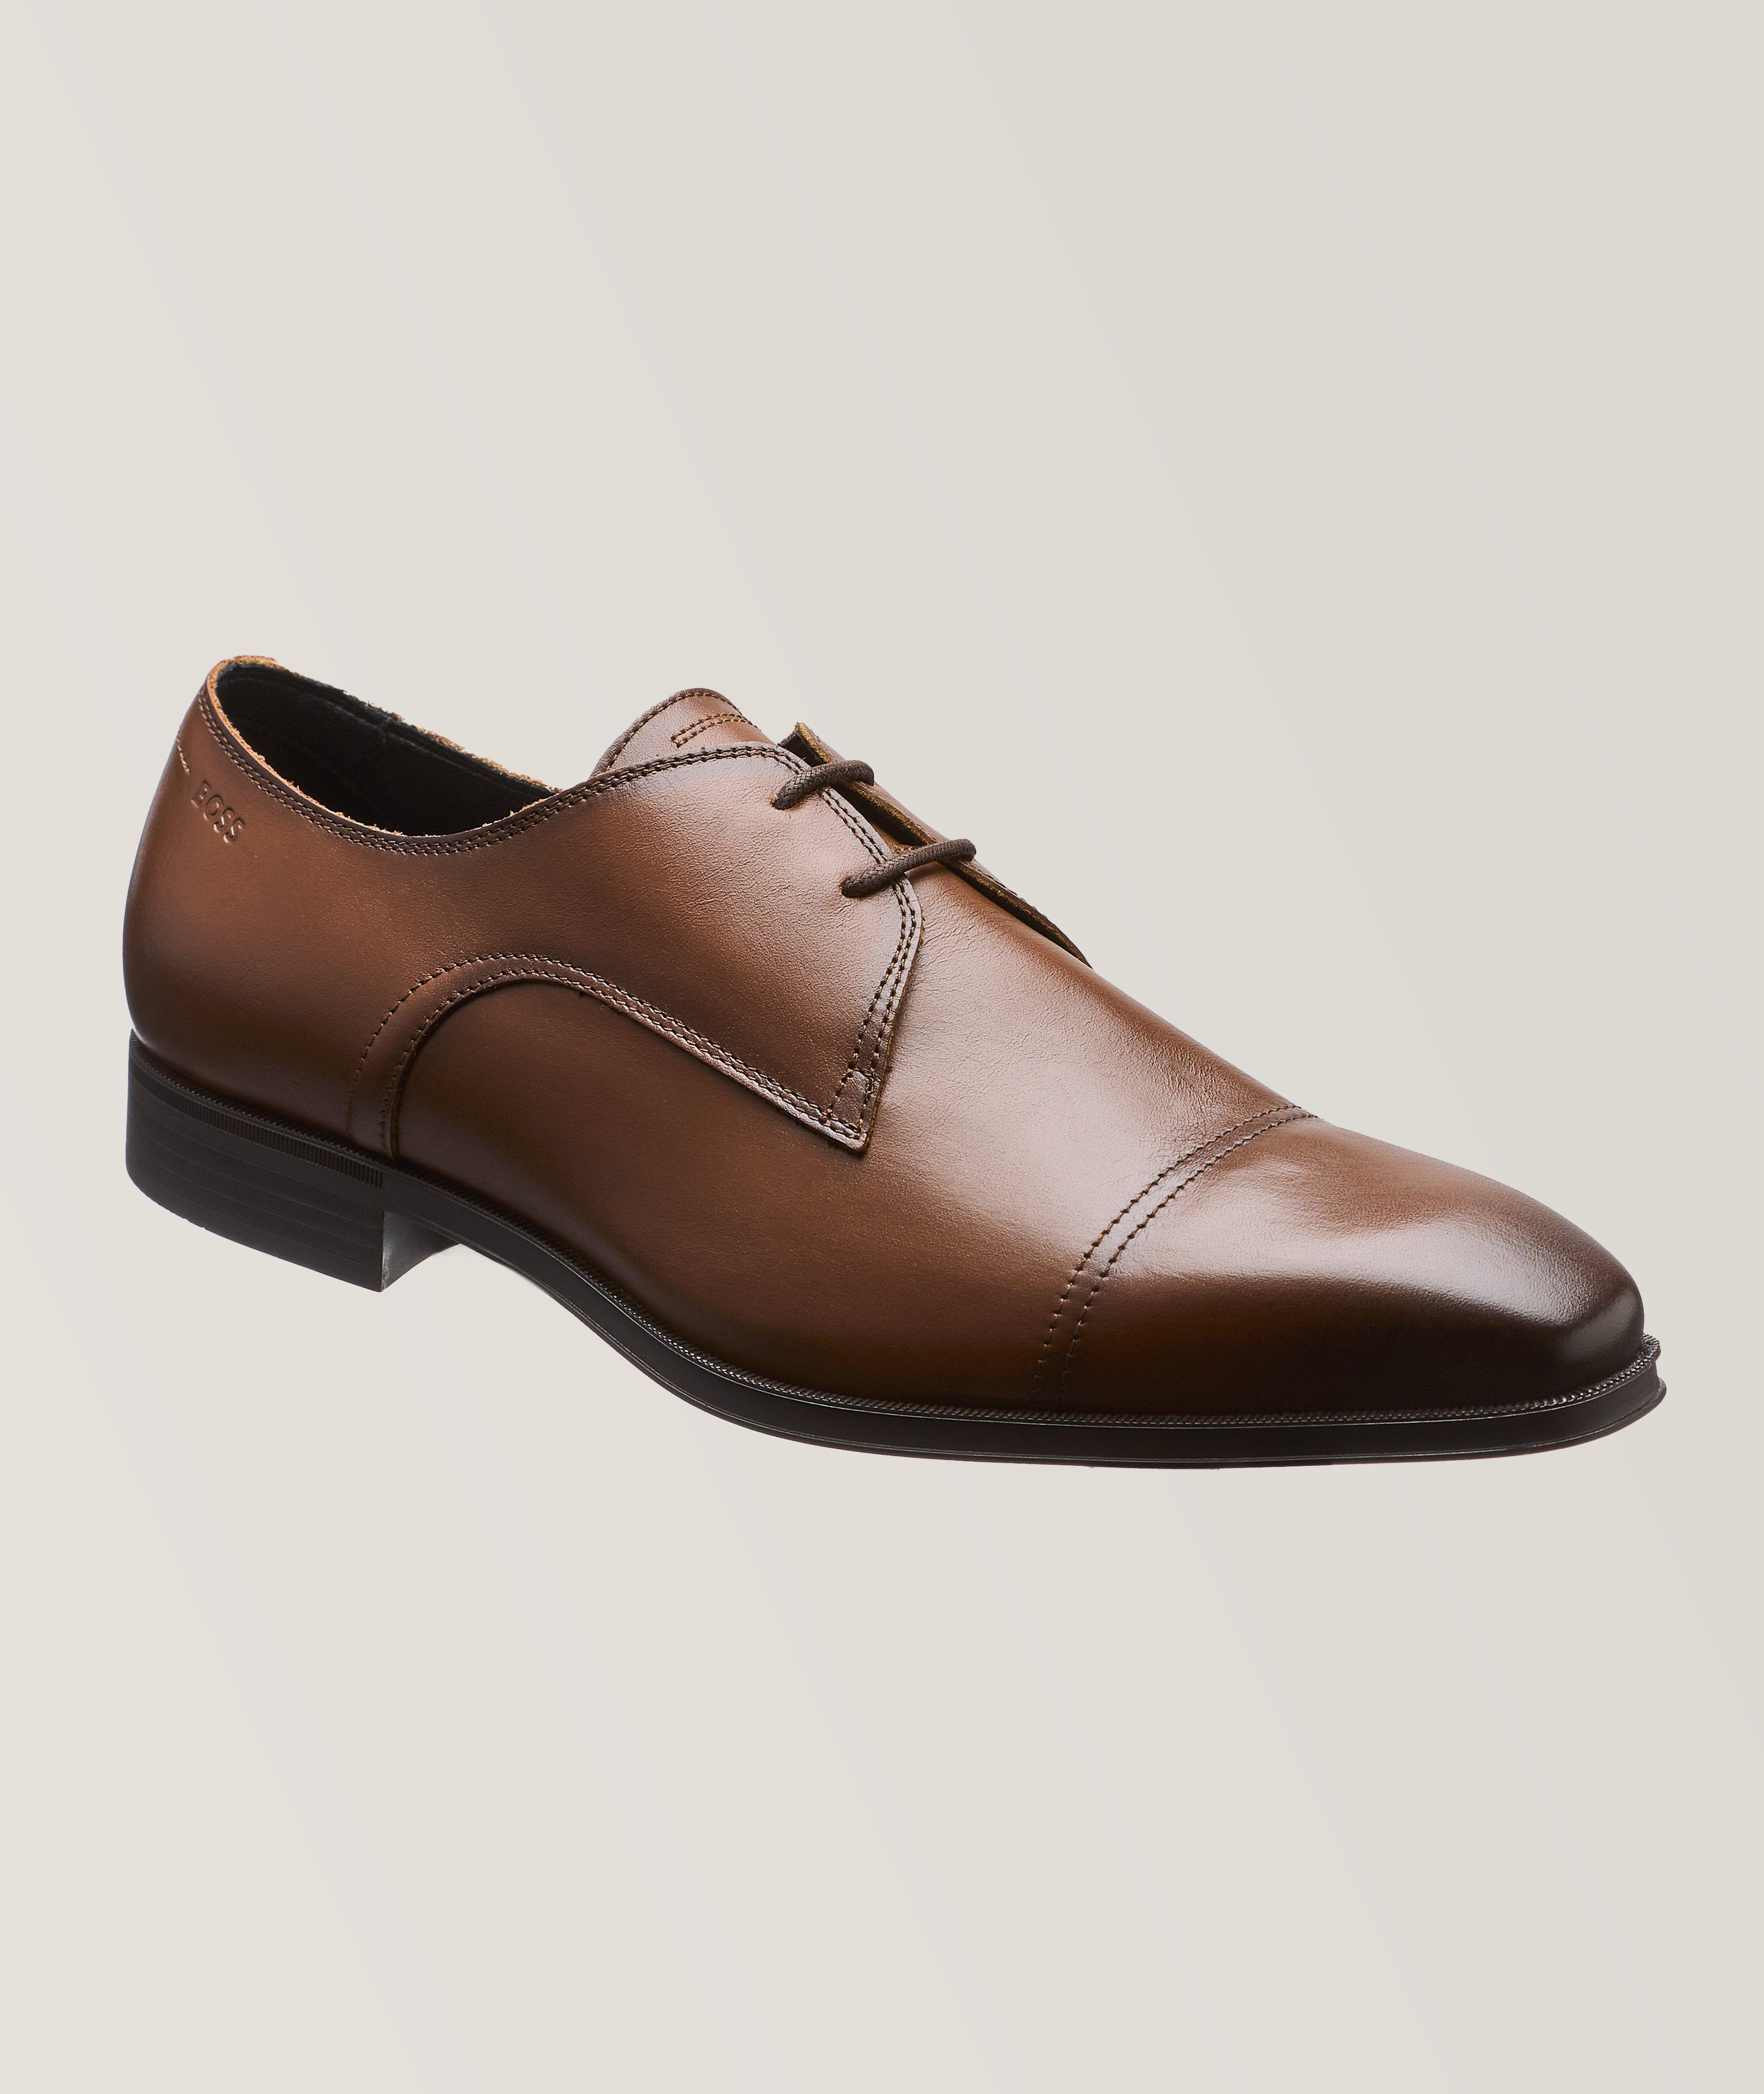 Theon Leather Derbies